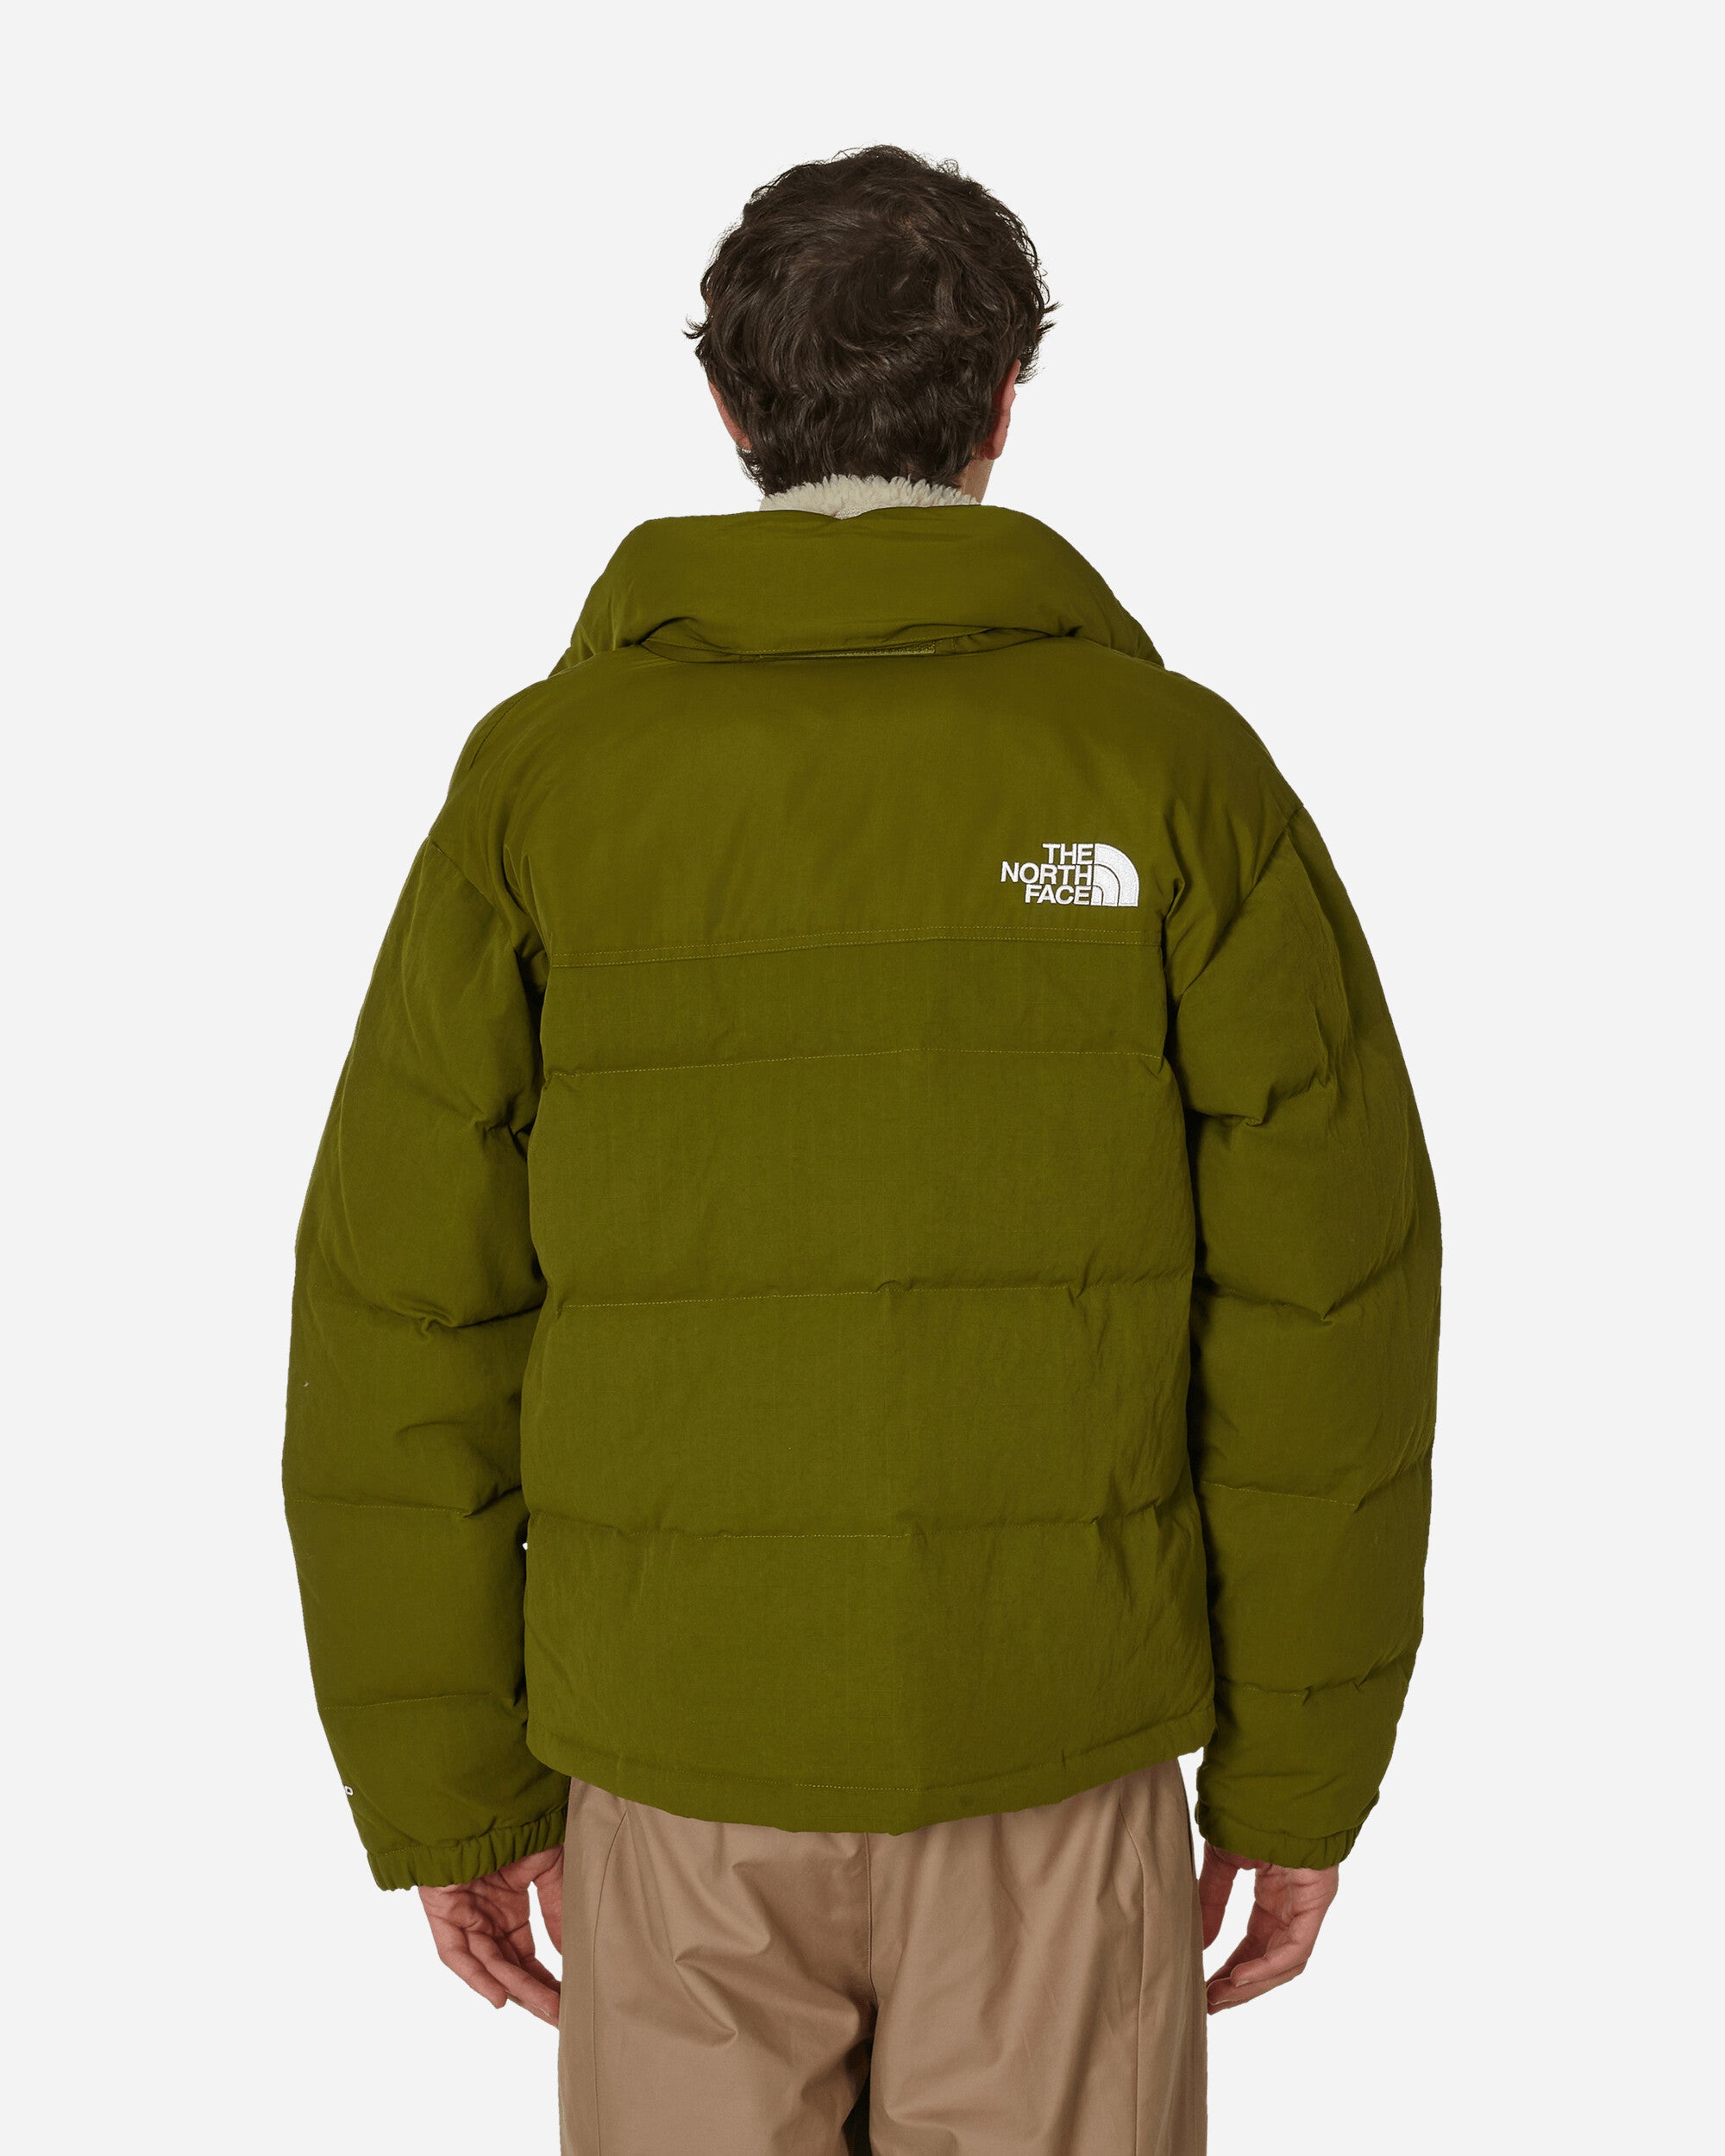 The North Face M 92 Ripstop Nuptse Jacket - Ripstop Pack Forest Olive Coats and Jackets Down Jackets NF0A86ZQ PIB1